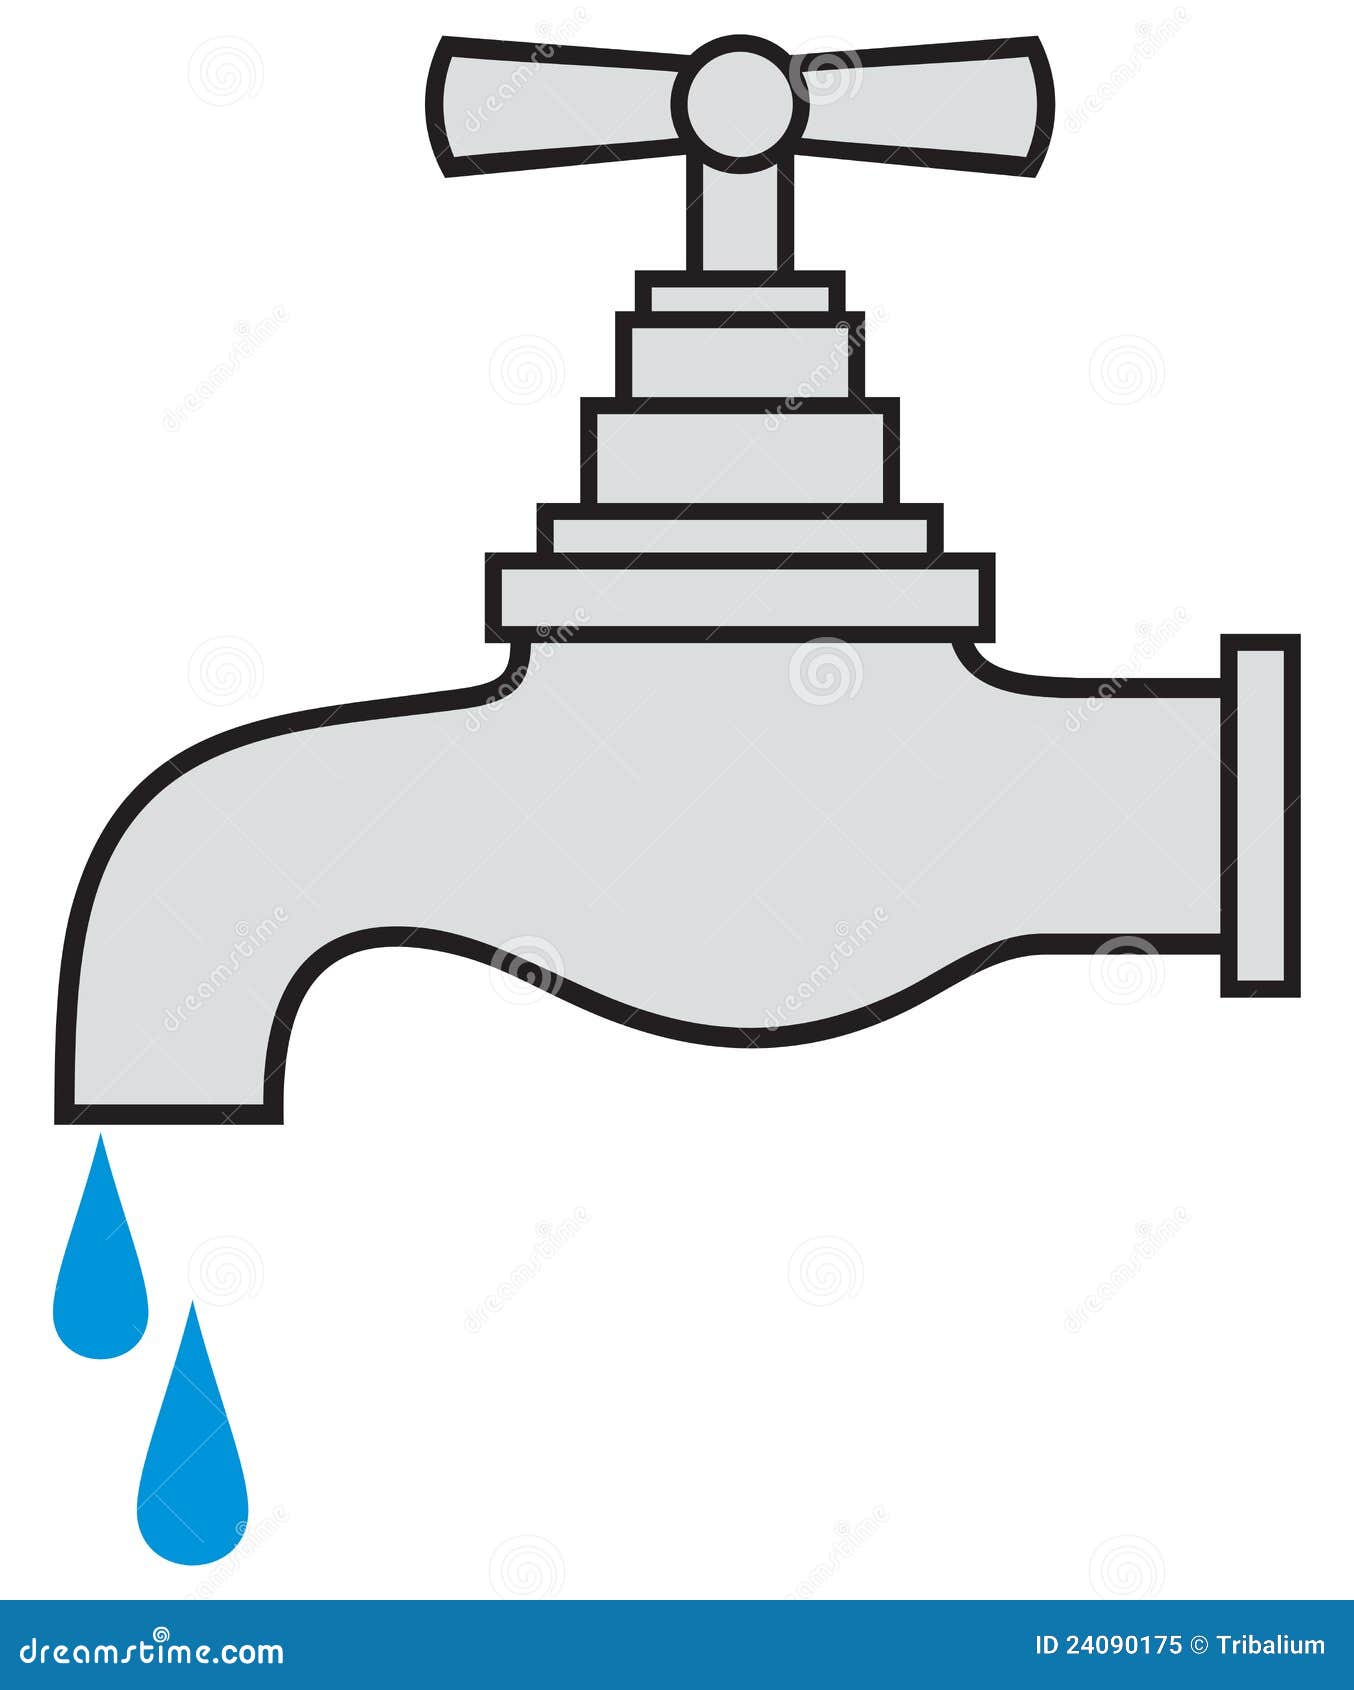 water tap 24090175